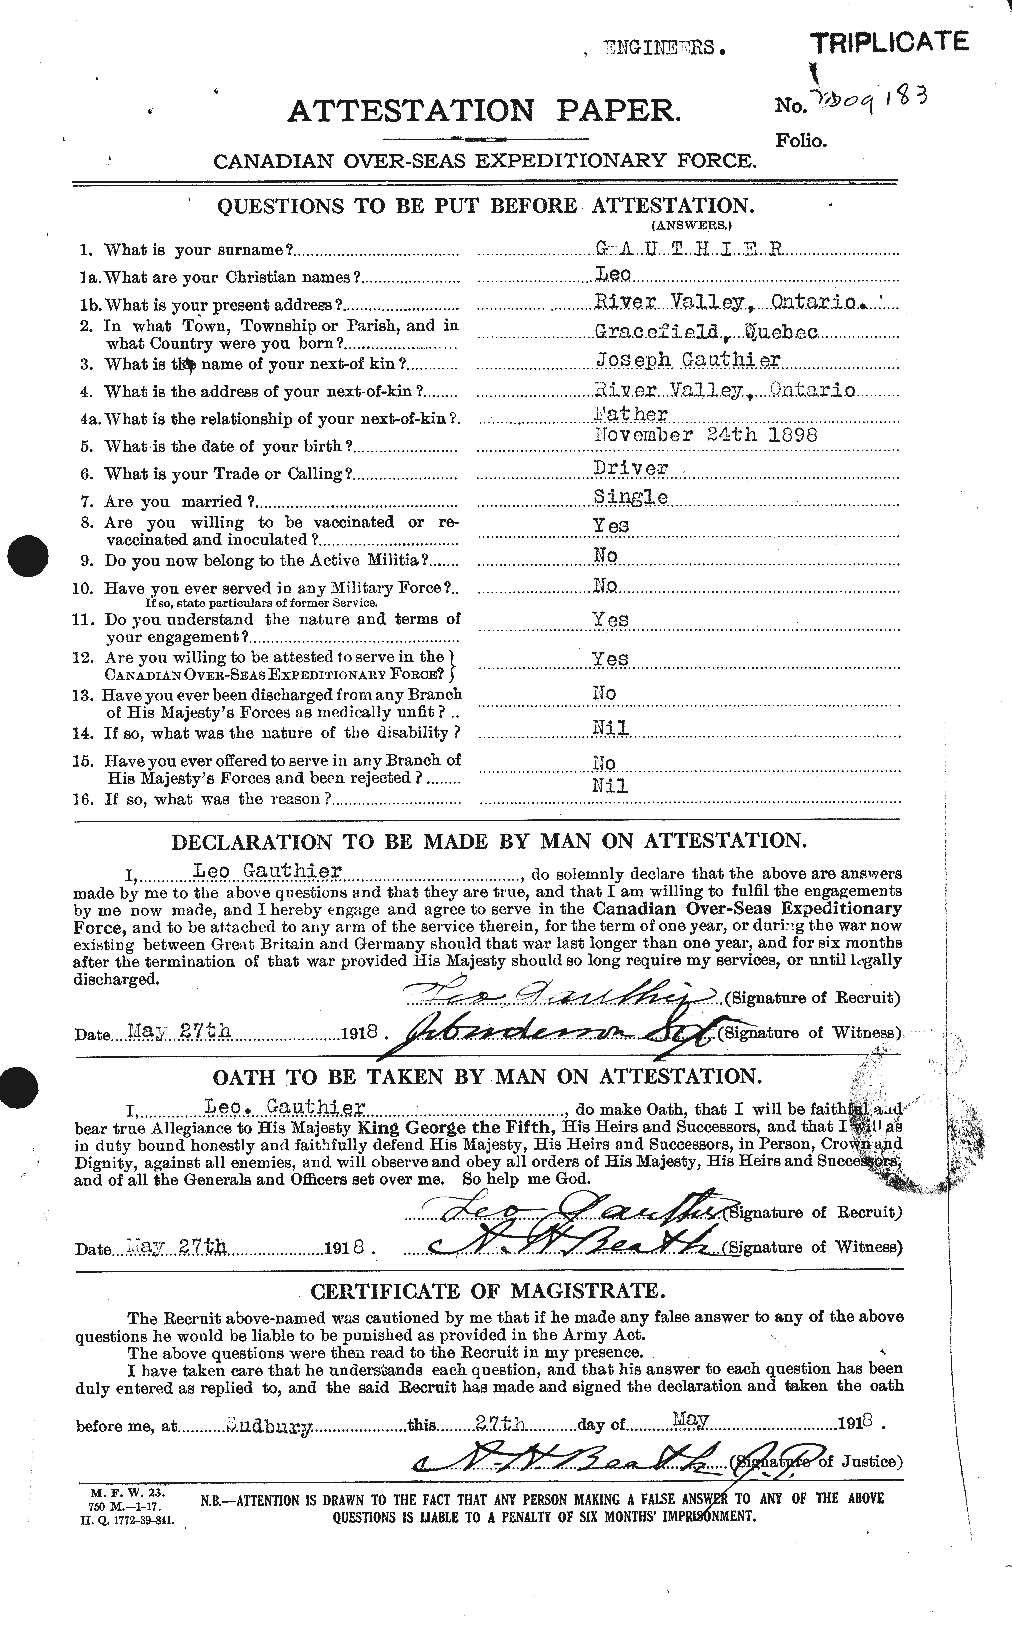 Personnel Records of the First World War - CEF 342365a